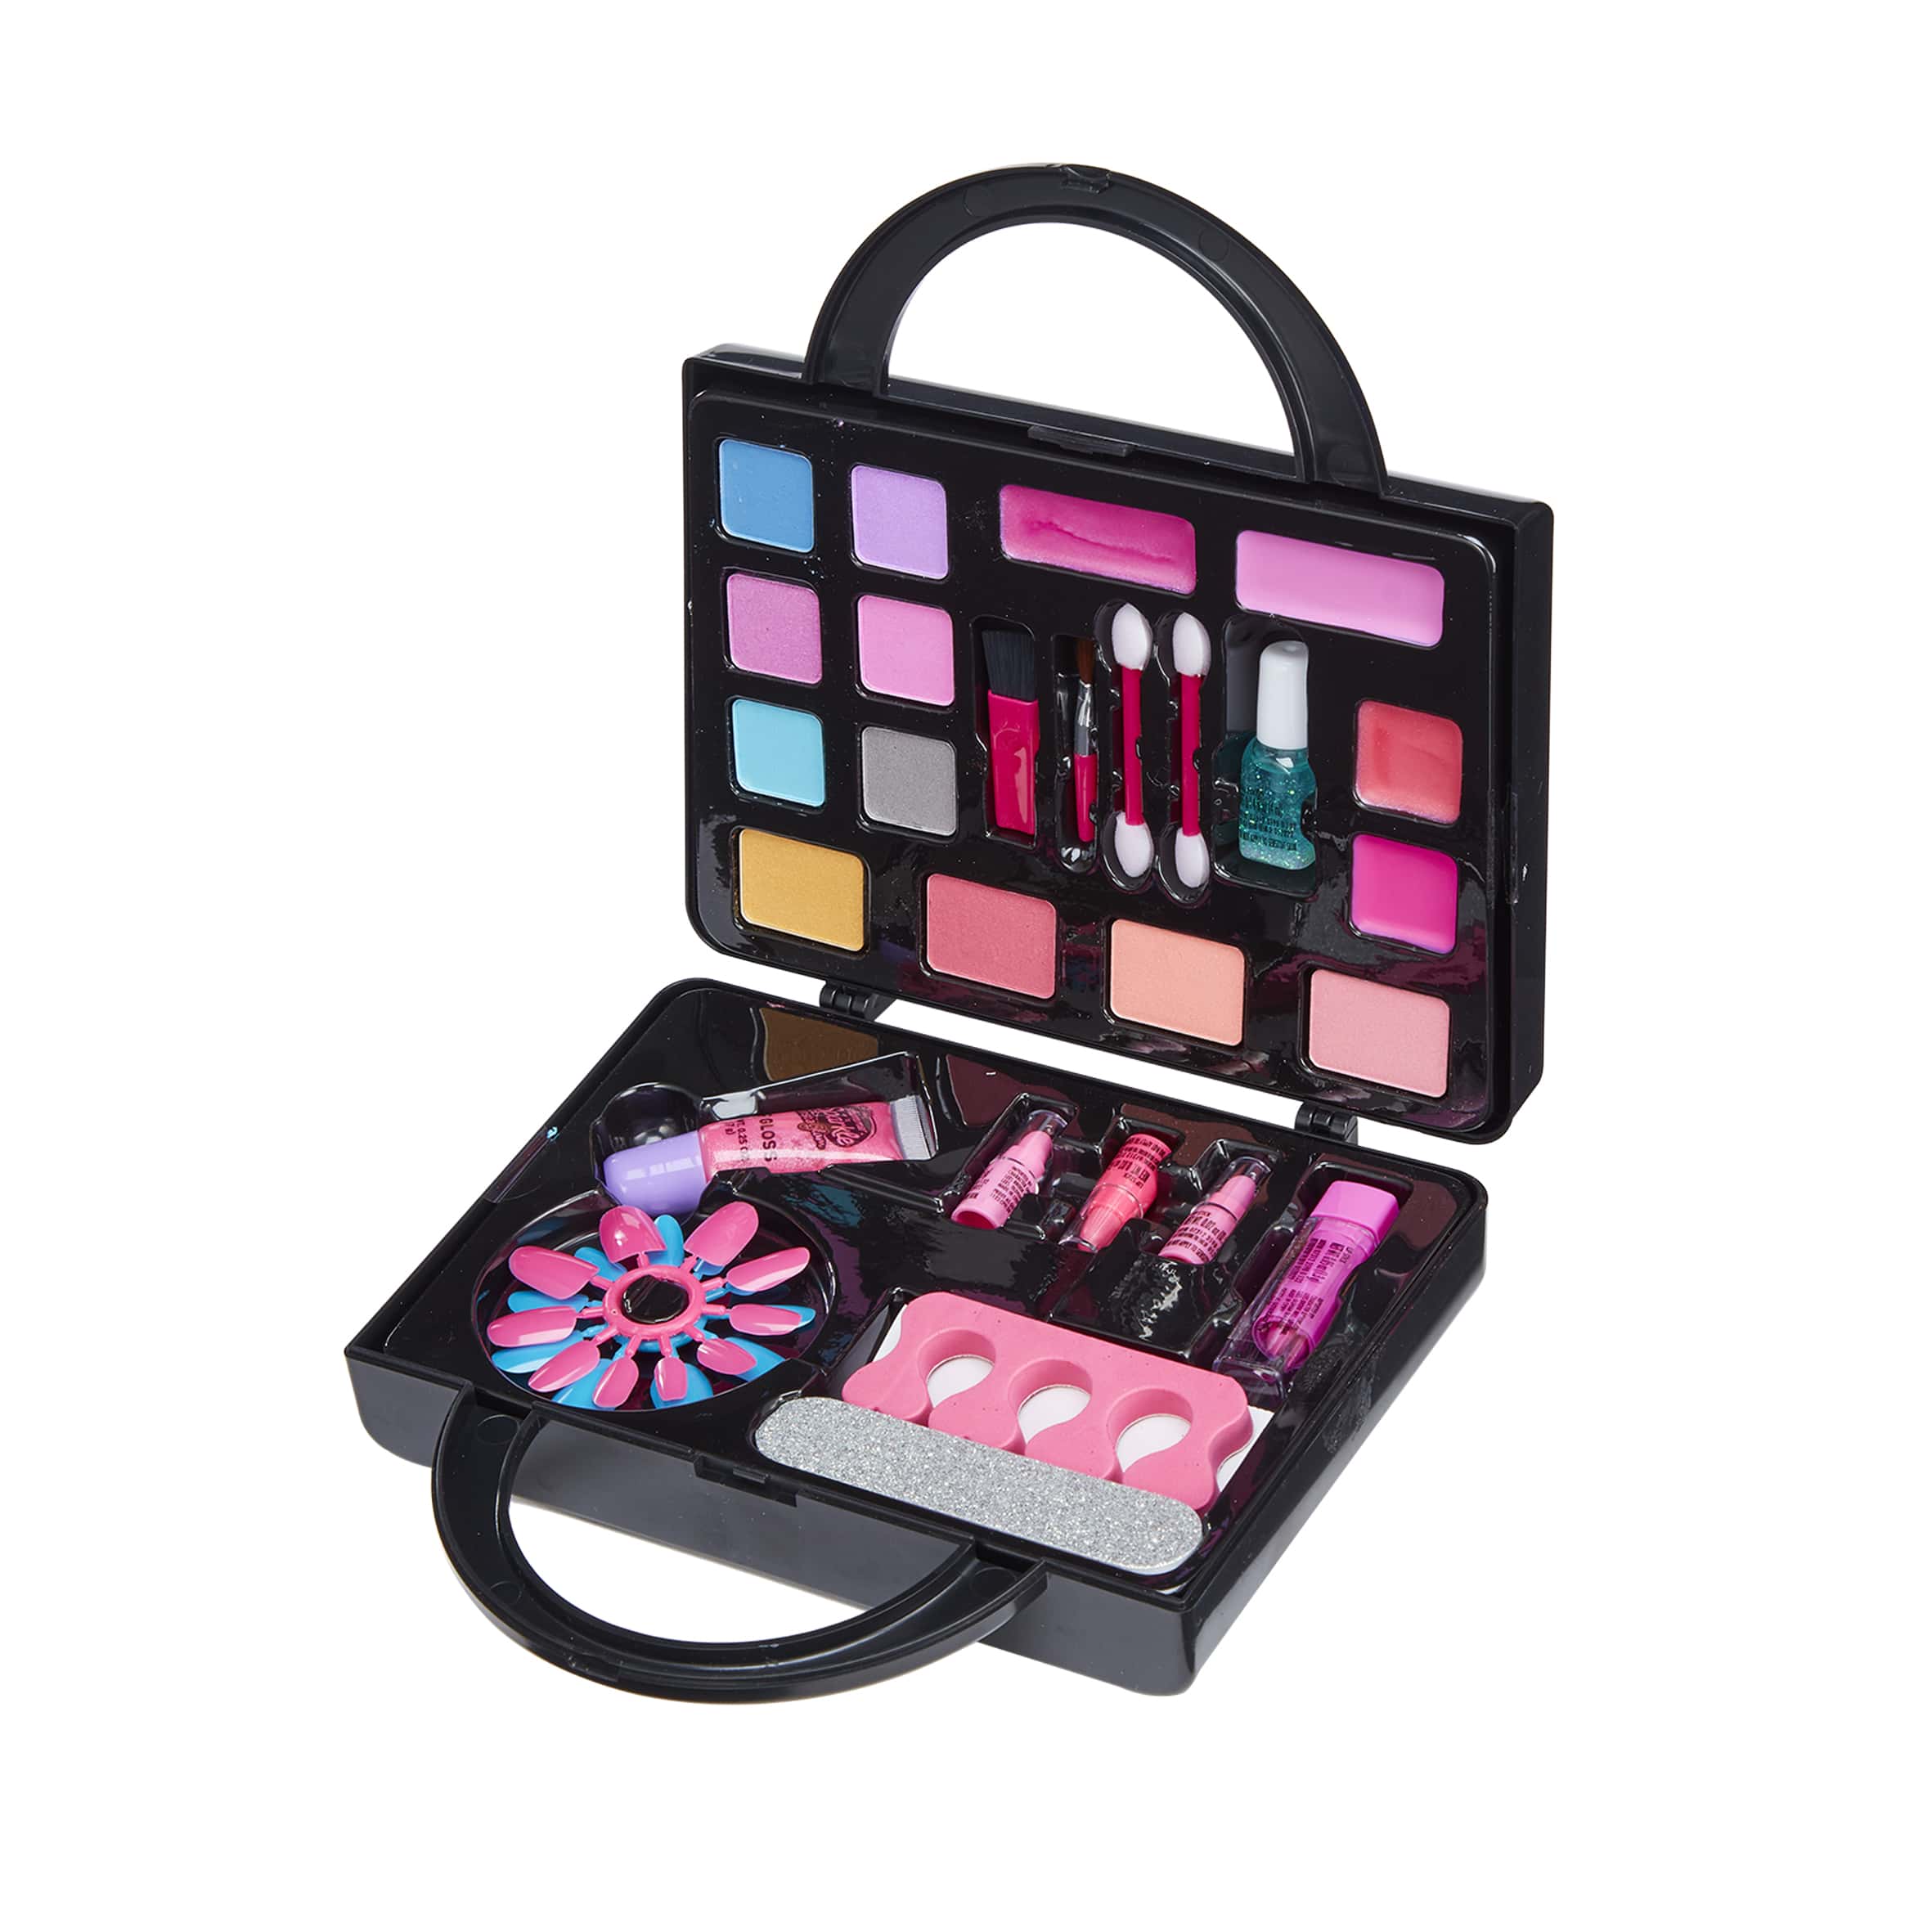 PURSE MAKEUP KIT - ALL YOU NEED - YouTube